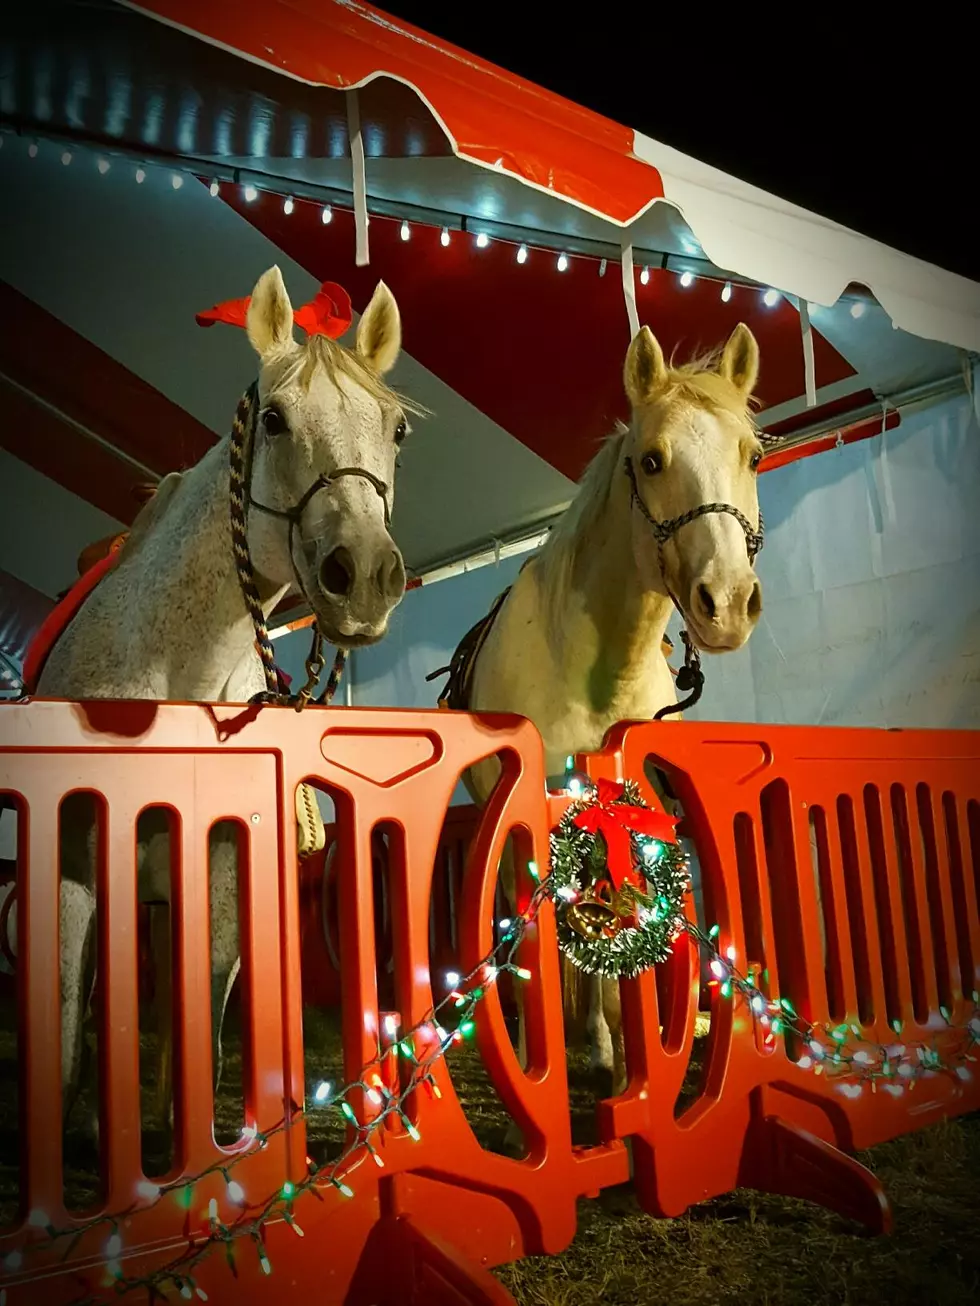 Nature In Lights $5 Pony Rides At The Blora Ranch